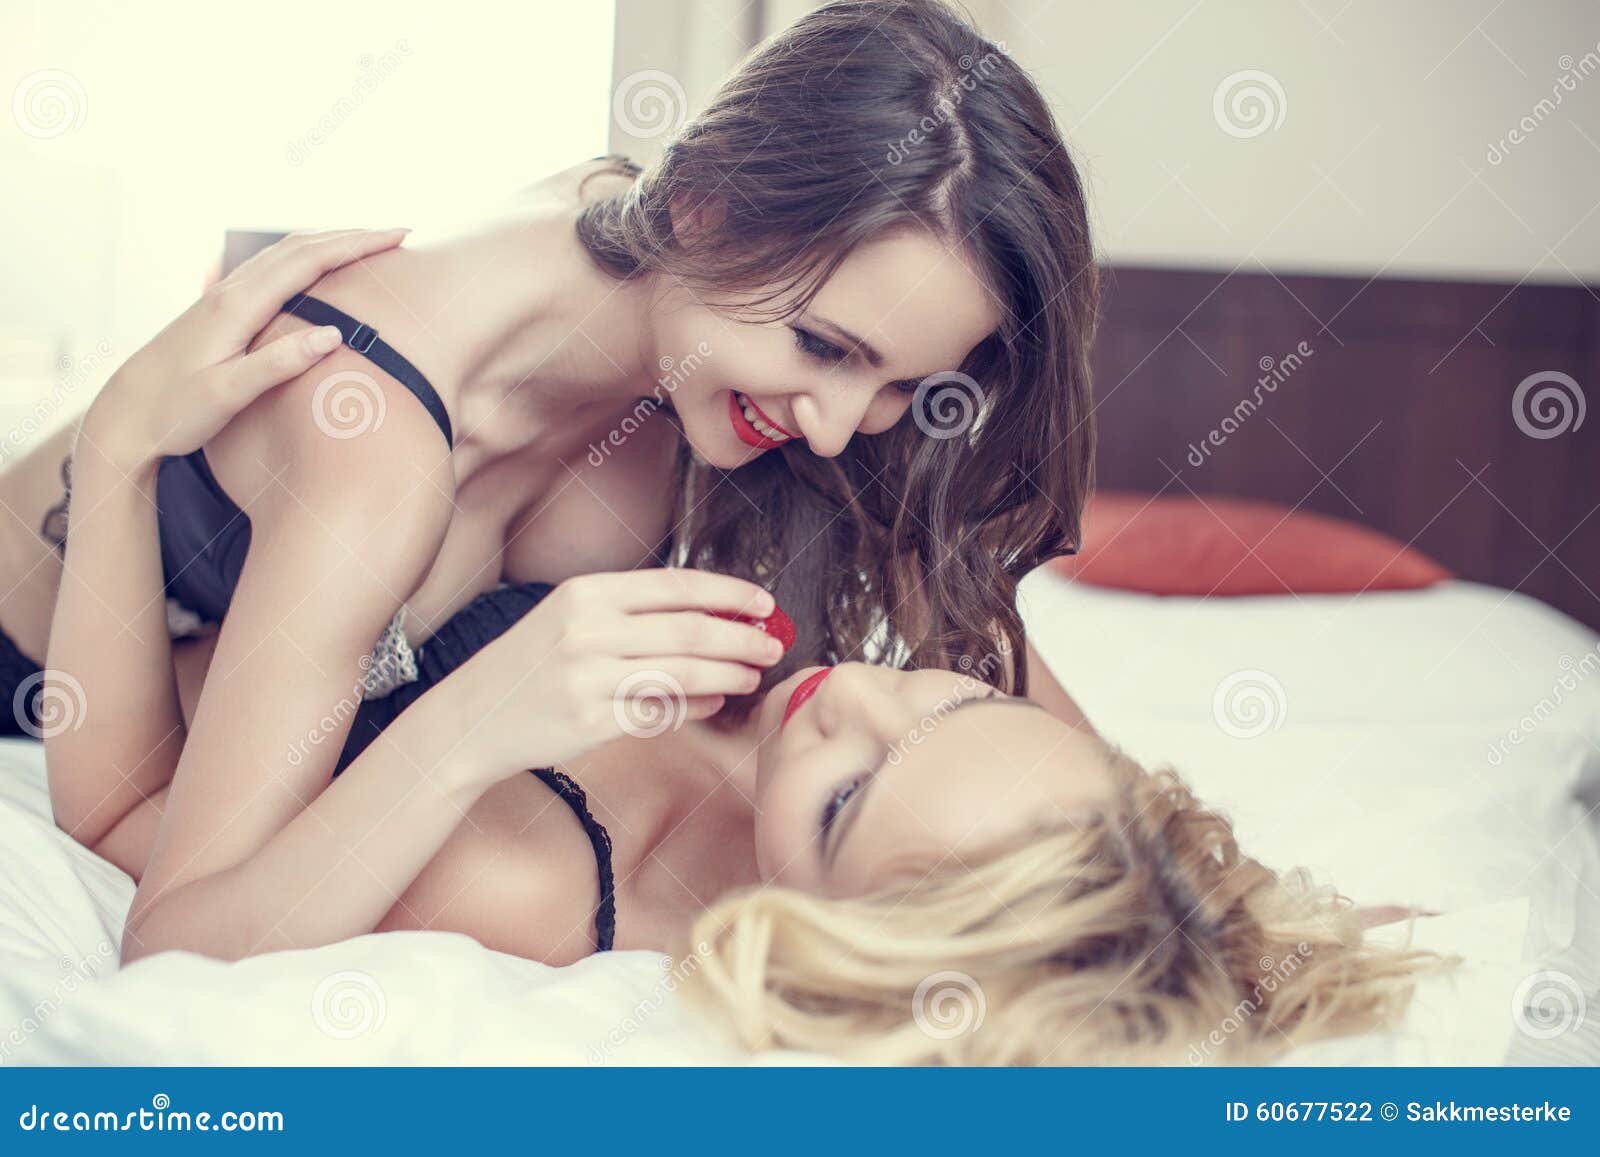 Foreplay Lesbians